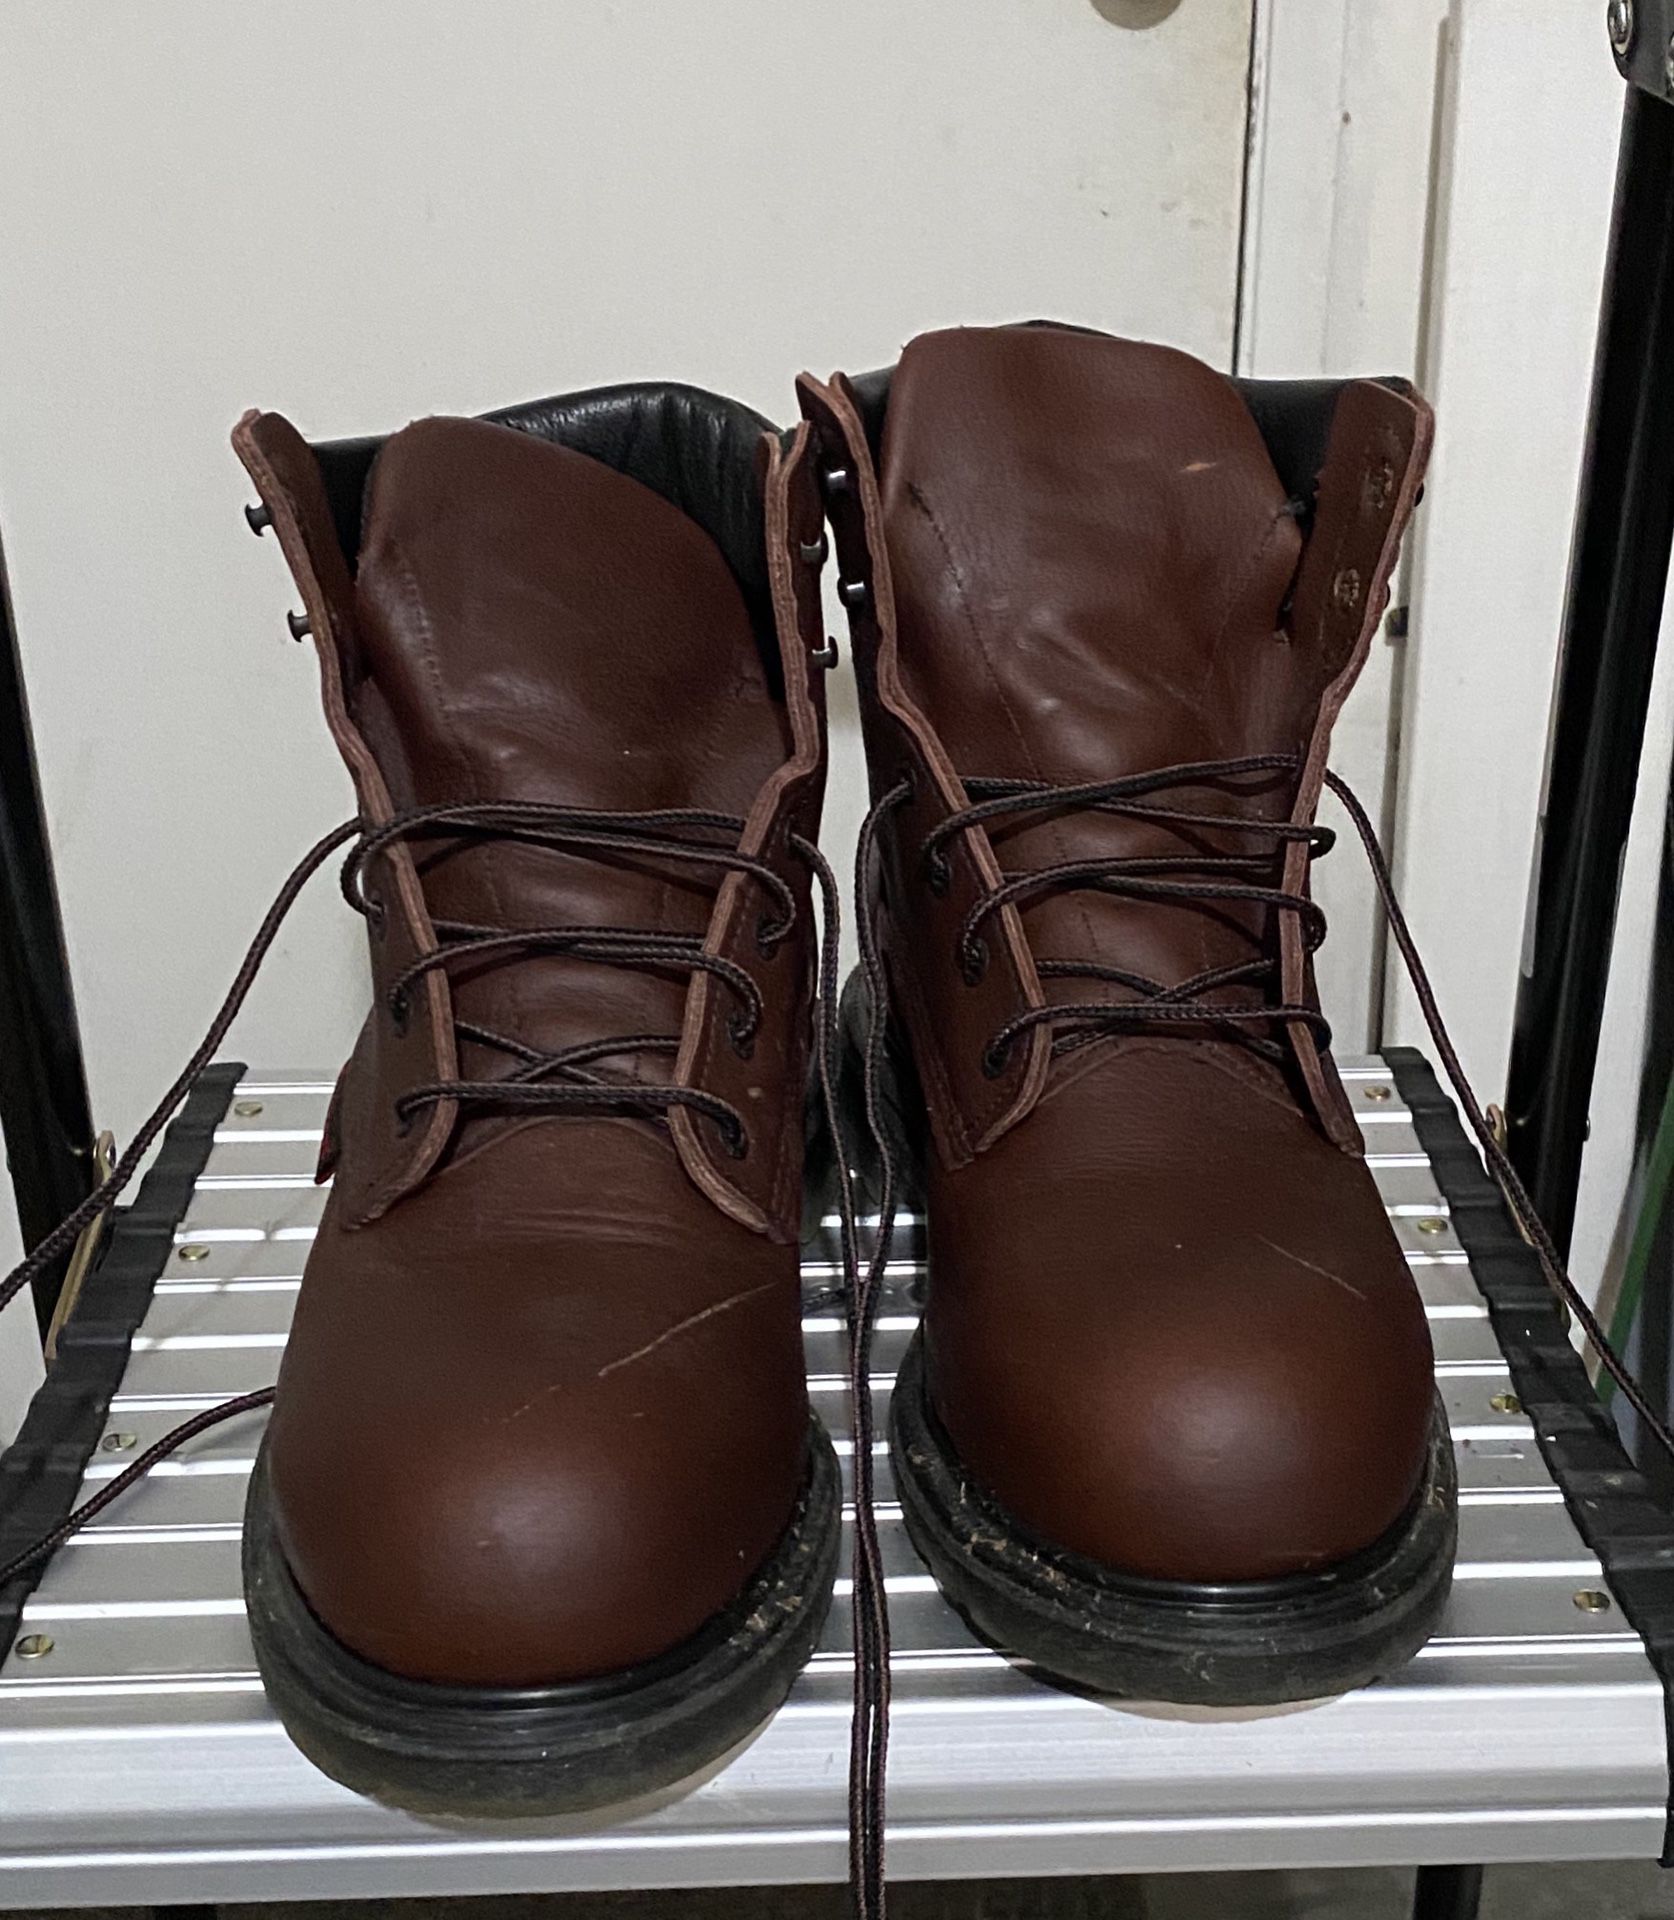 Red Wing waterproof work boots size 9.5